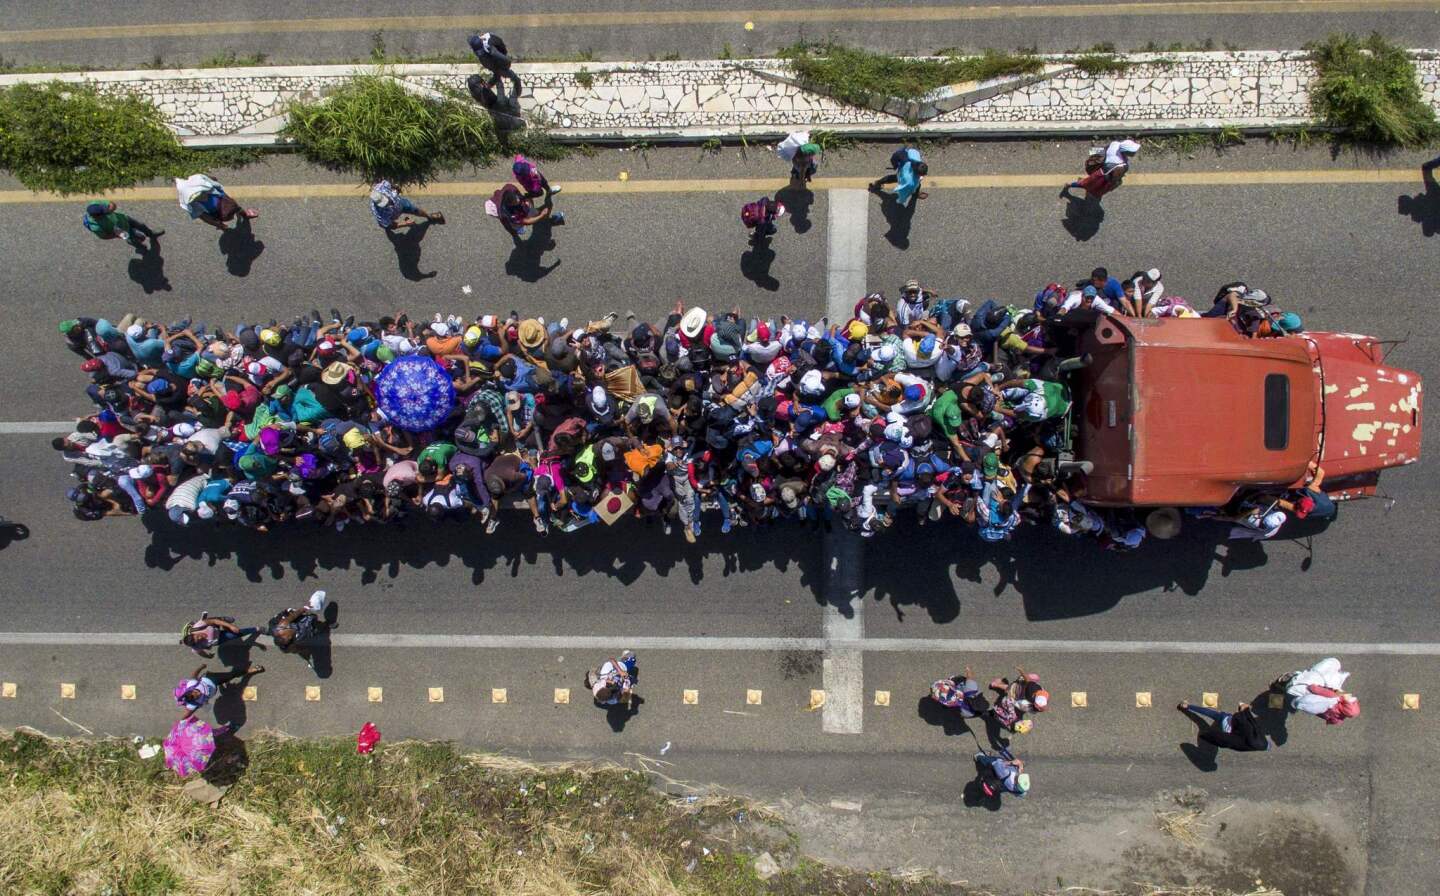 Aerial view of Honduran migrants aboard a truck as they take part in the caravan on the outskirts of Tapachula, Mexico.